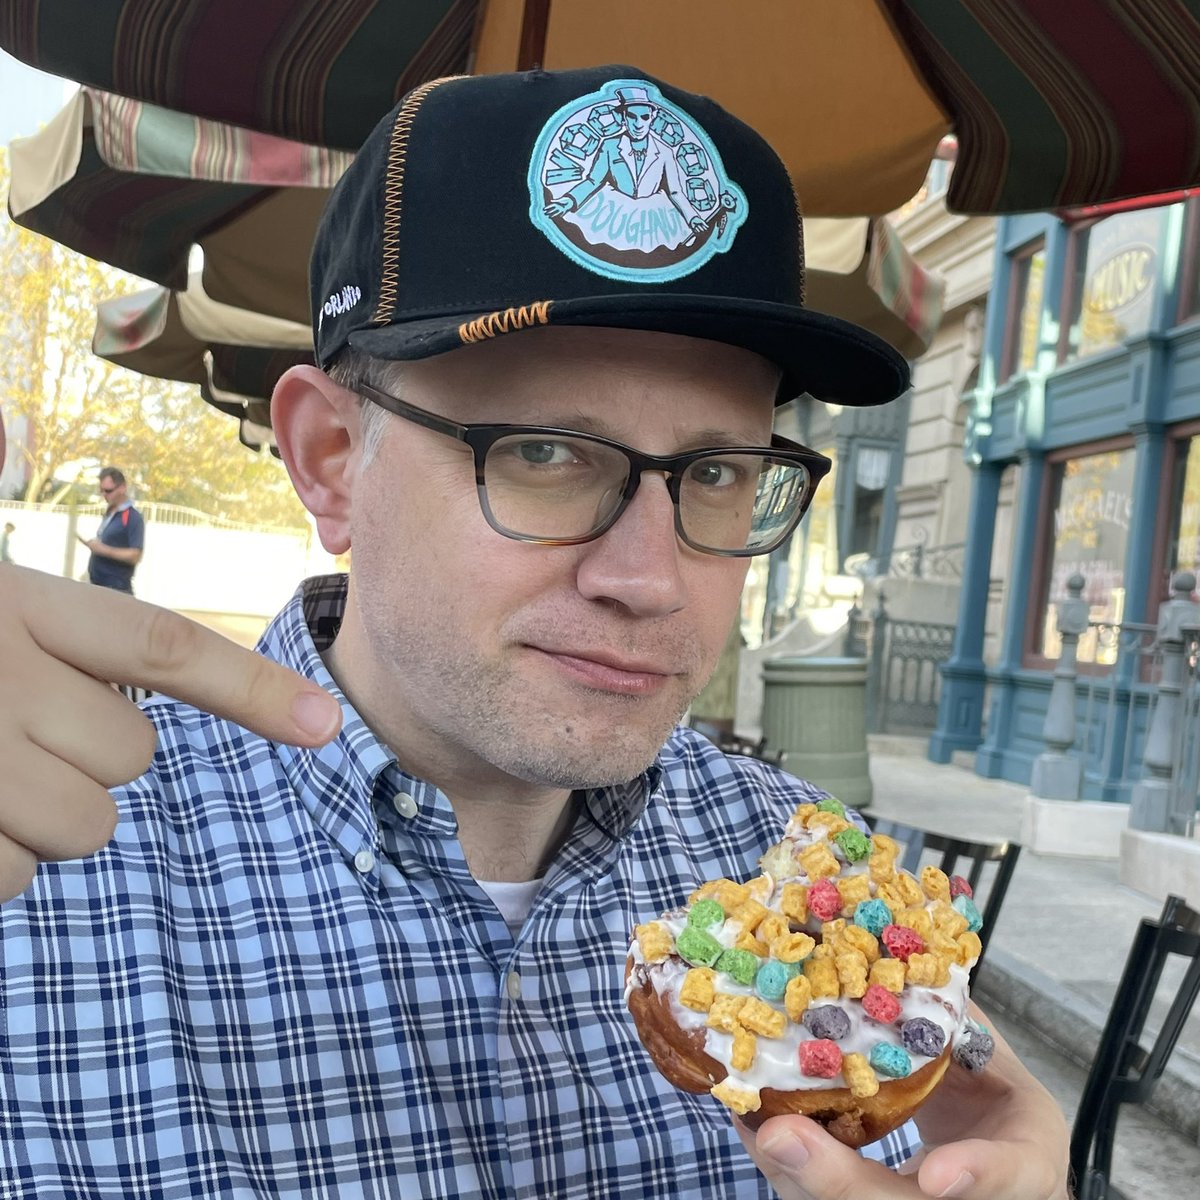 In 2015, I gave a talk at Google. Right before I went on, I saw a magnificent donut with Captain Crunch cereal on top. I passed it up to stay sharp. I’ve regretted it ever since. Until today, when I found the “Oh Captain, My Captain” at @VoodooDoughnut. I ate 2. I regret nothing.